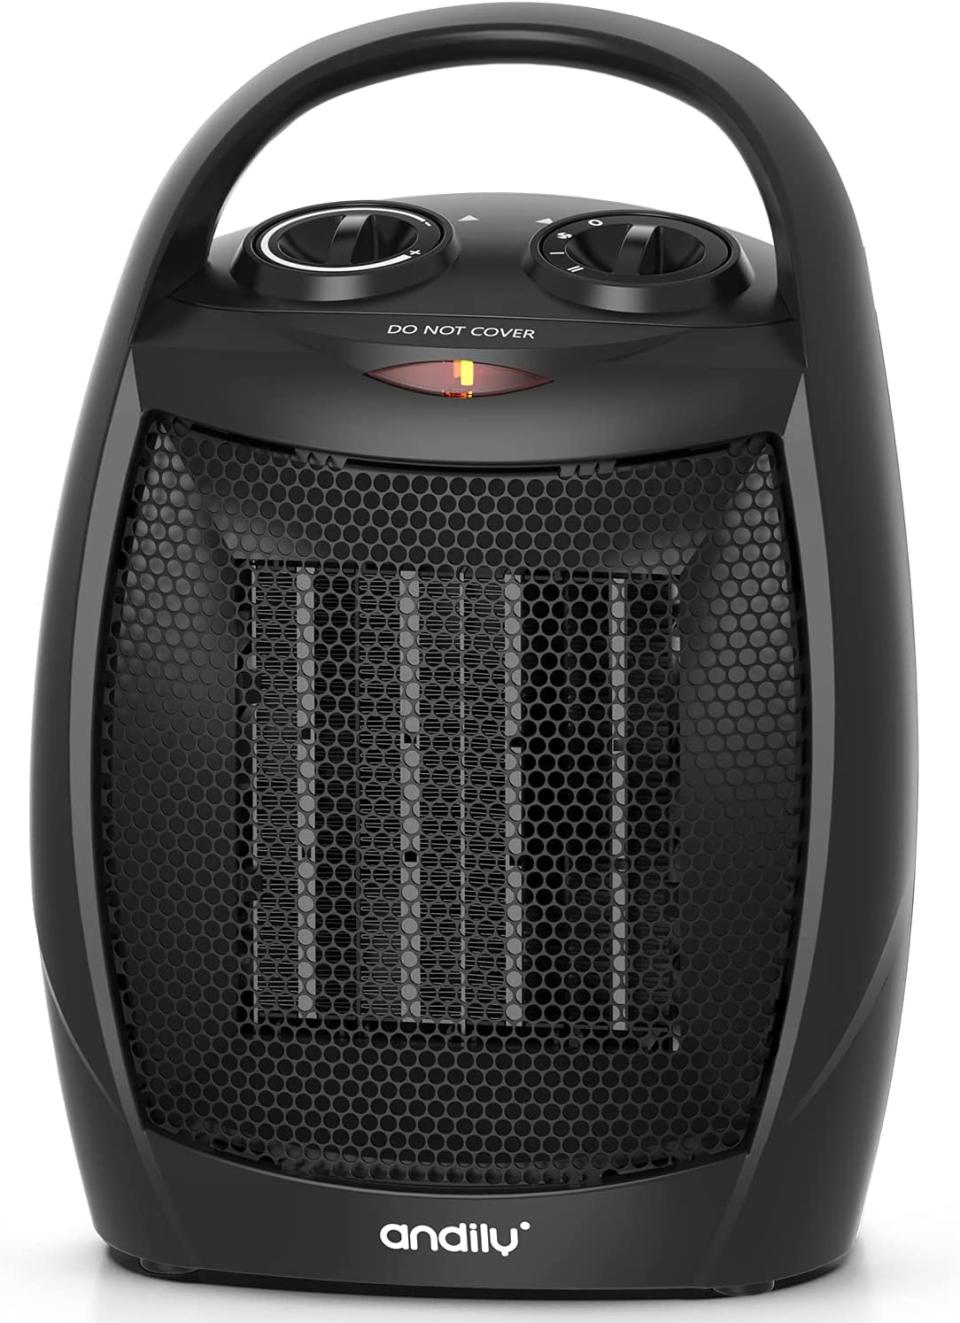 Andily Compact Portable Heater, best portable heaters